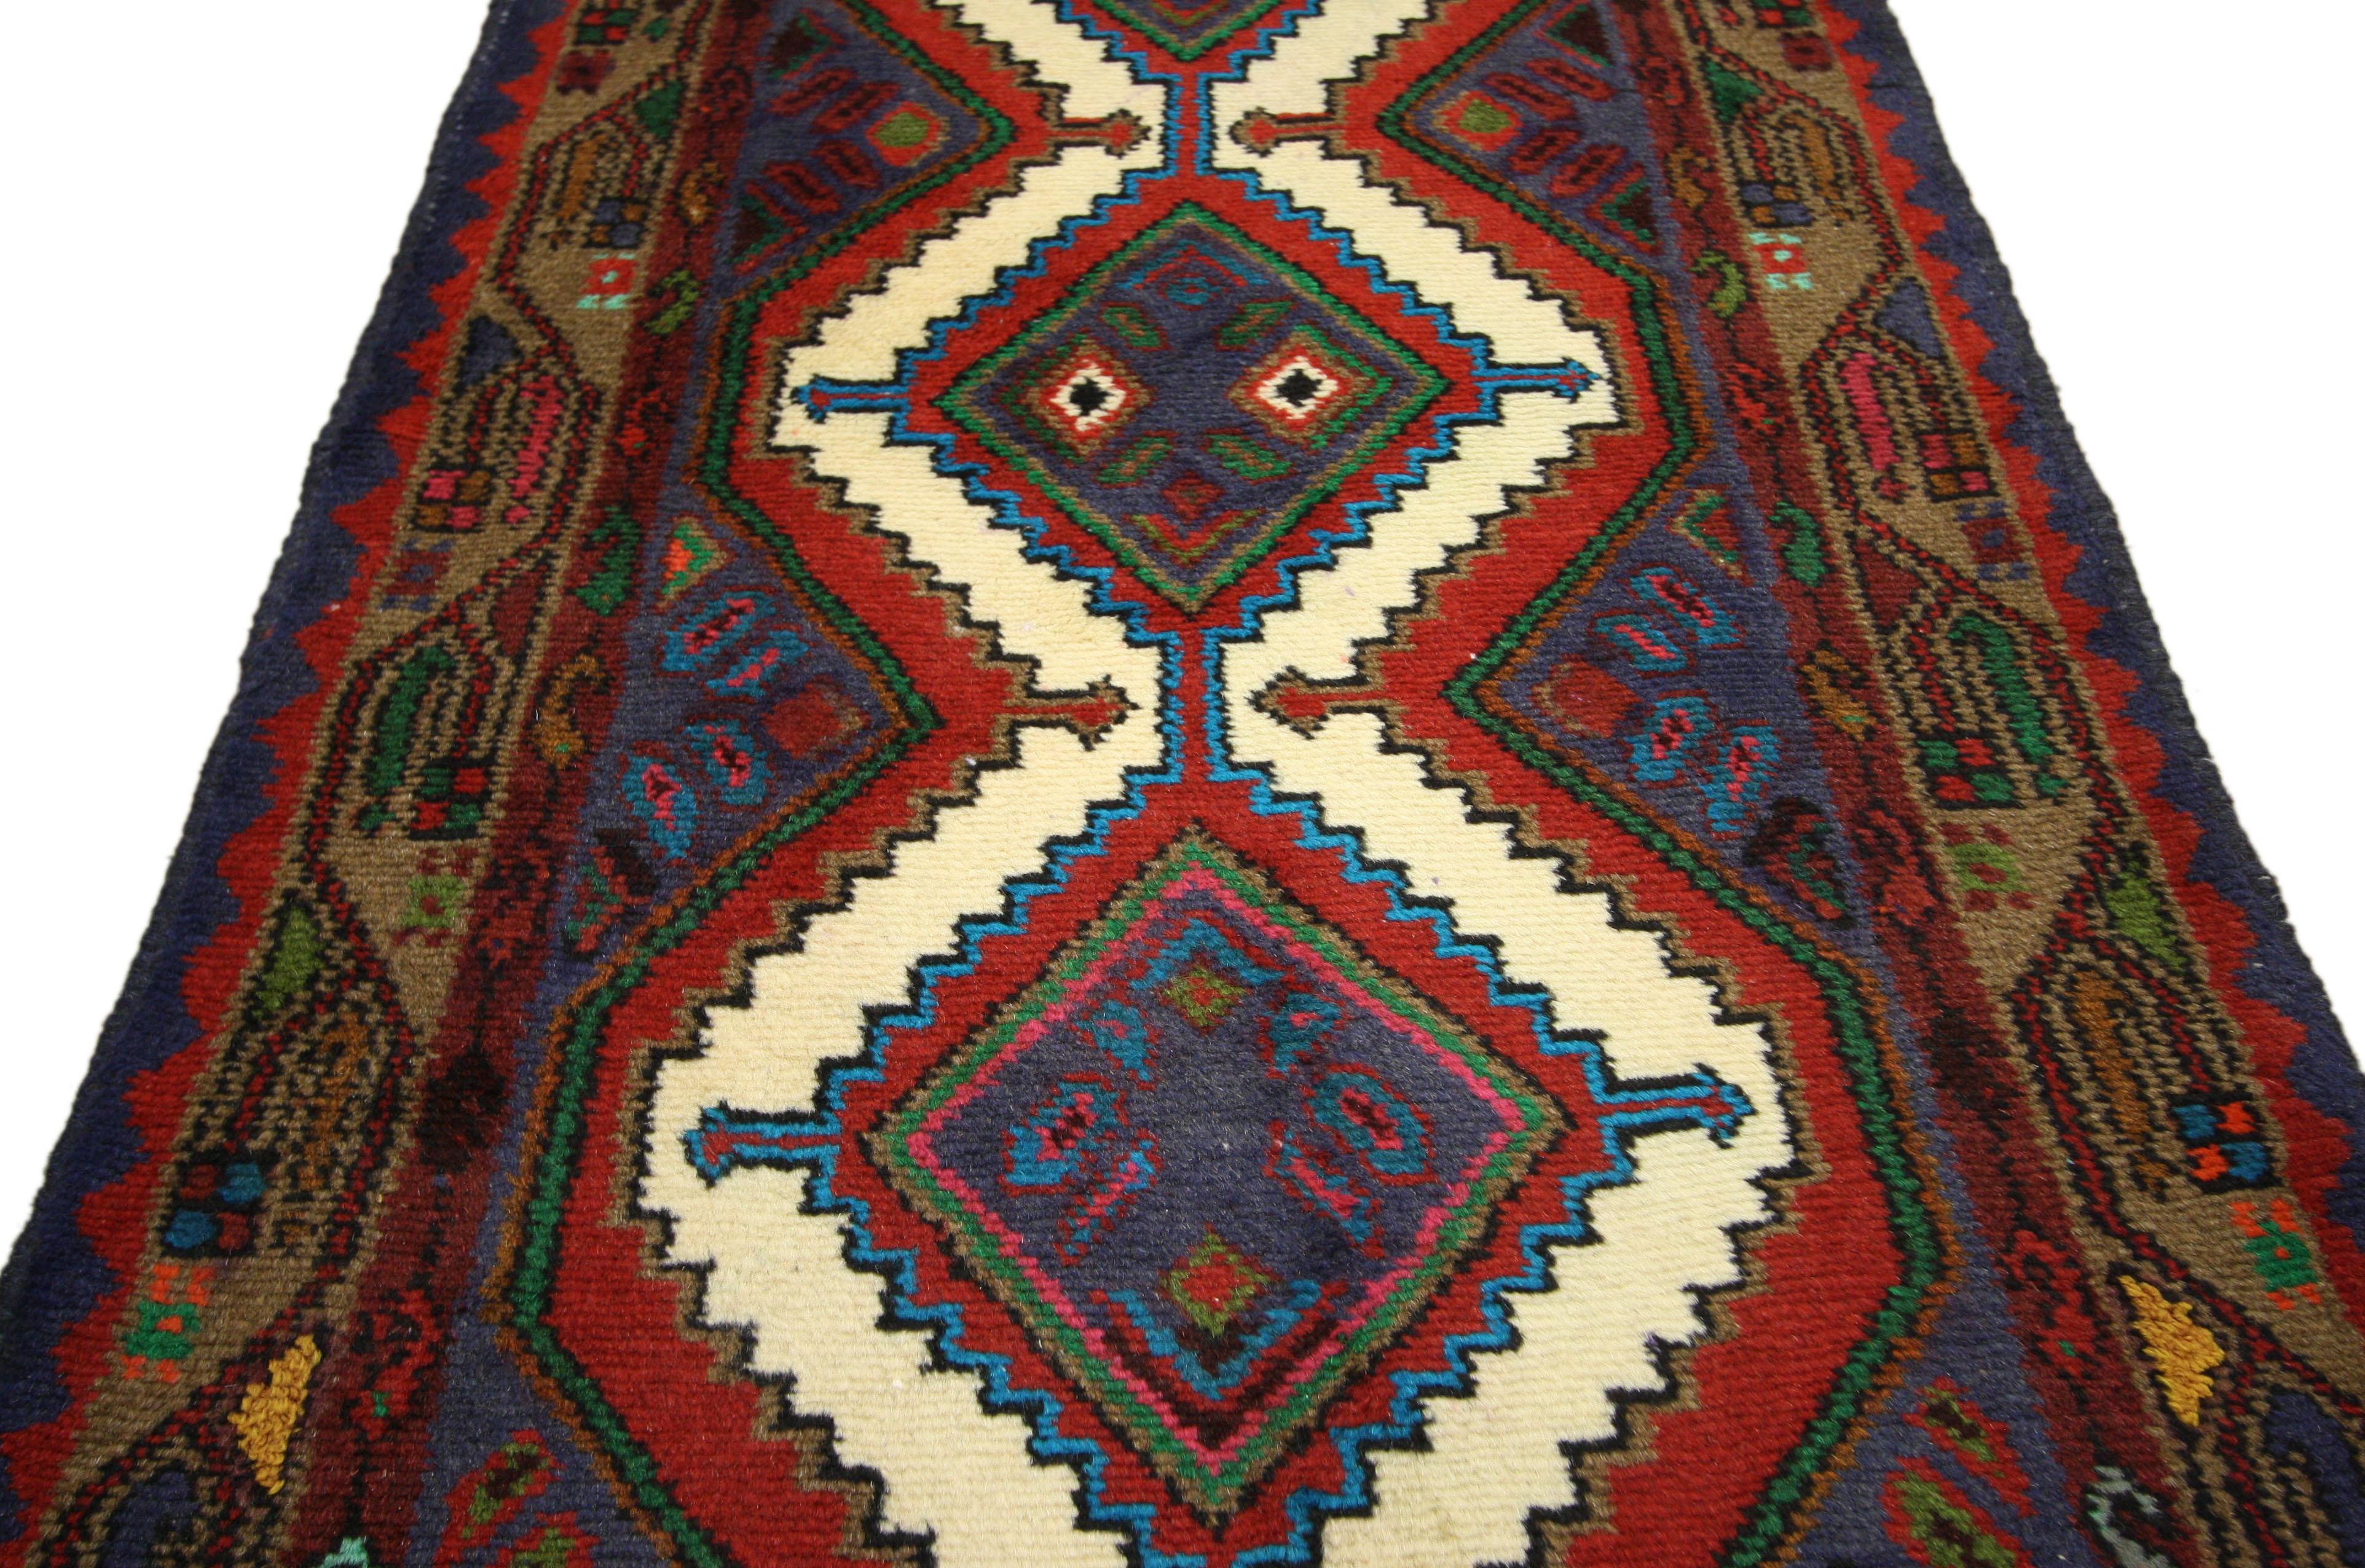 Vintage Persian Hamadan Runner, Hallway Runner with Art Deco Style In Good Condition For Sale In Dallas, TX